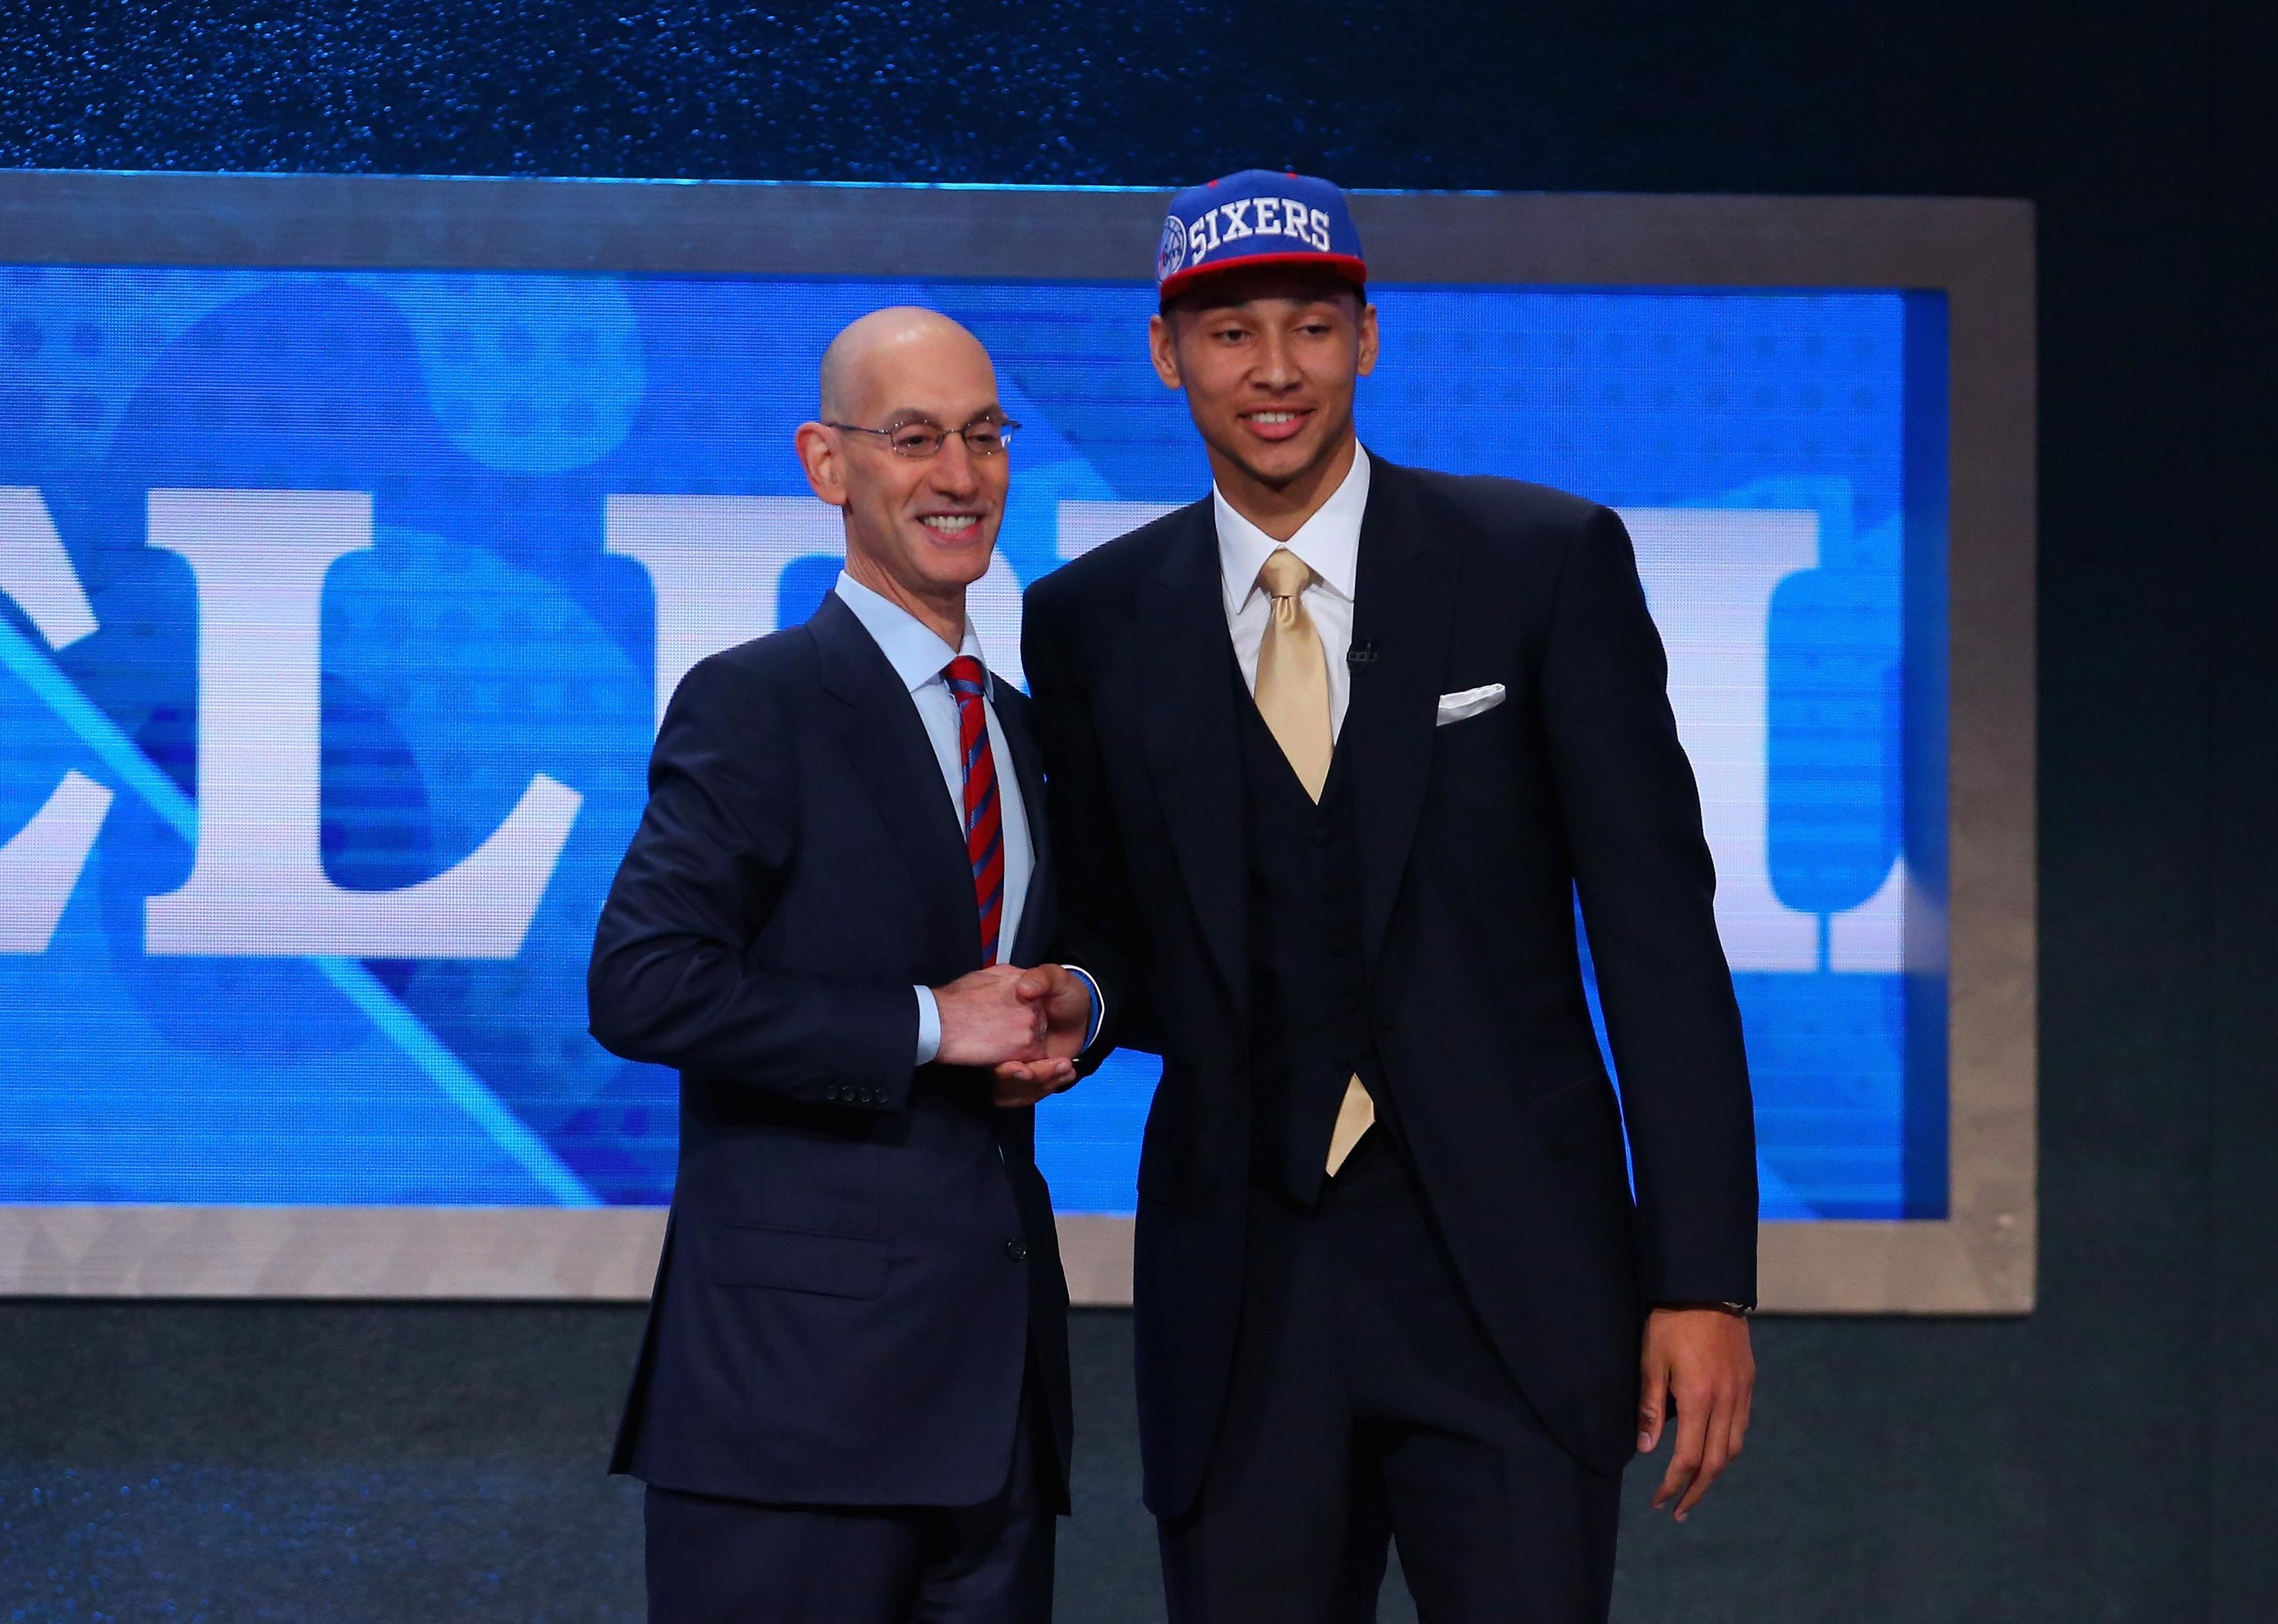 Ben Simmons with Commissioner Adam Silver after being drafted.